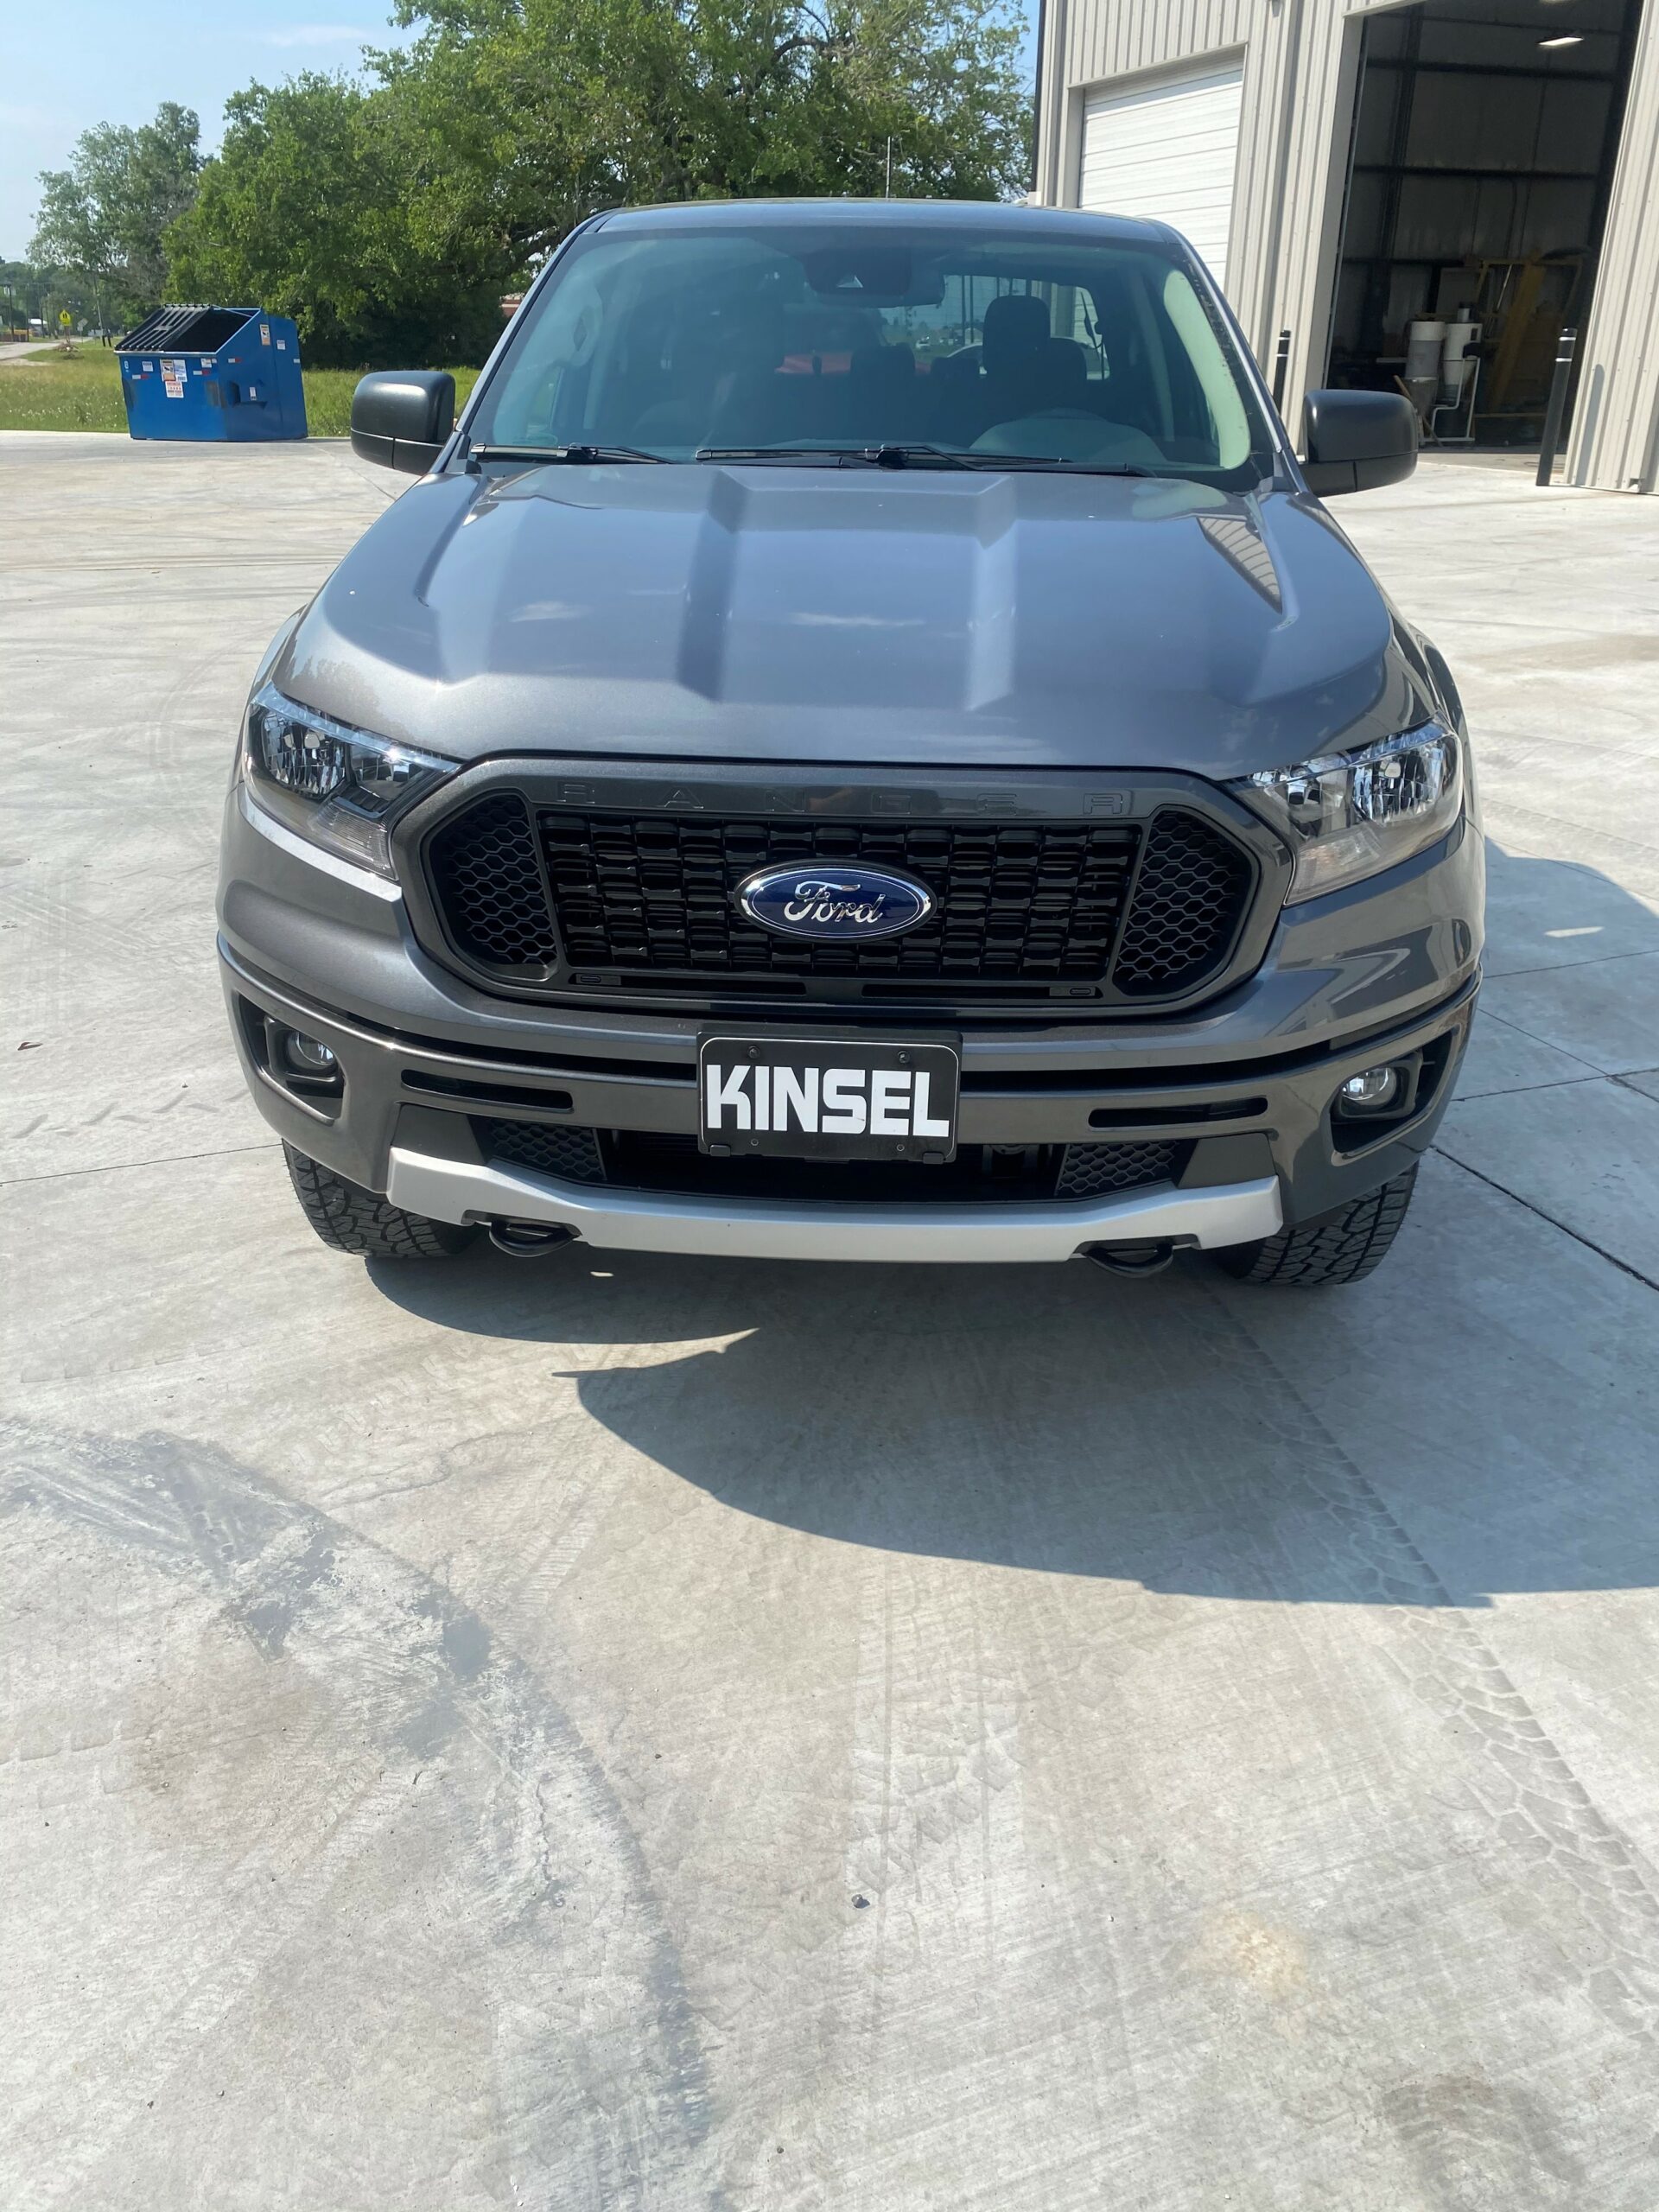 front view of hidden k40 laser jammers on a 2020 ford ranger in texas